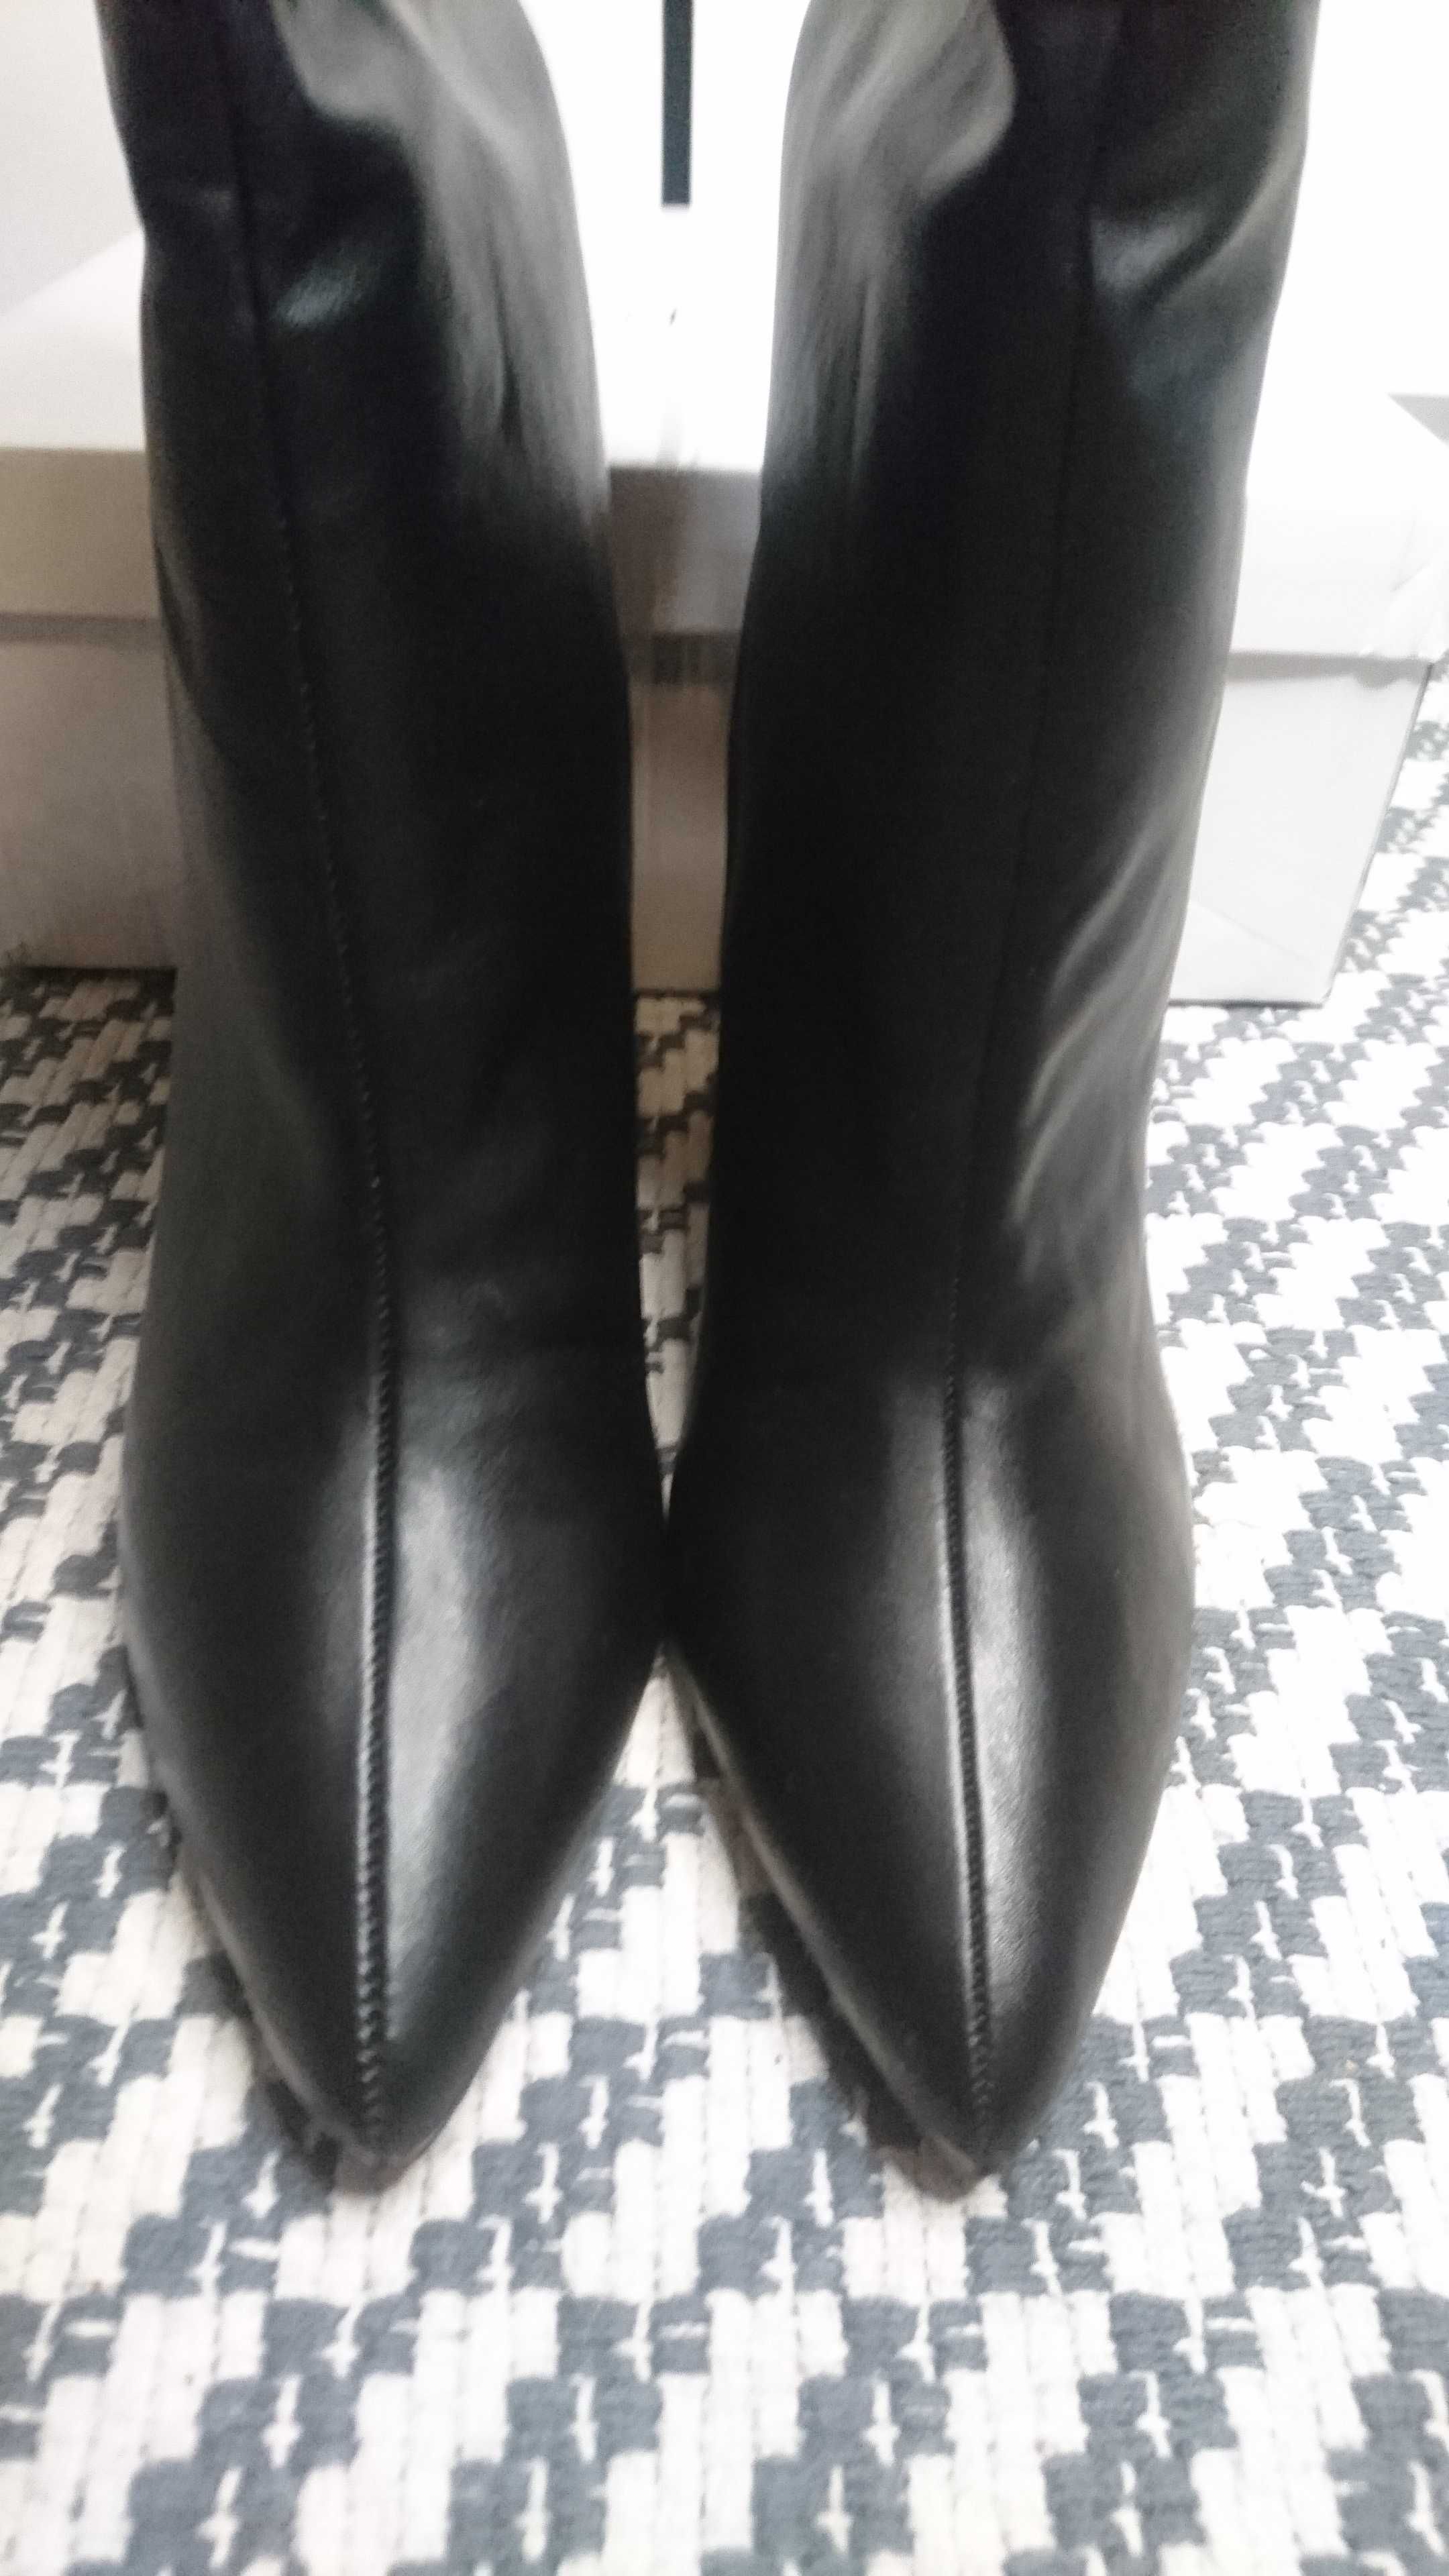 Buty Nly Nelly Shoes Wide Knee High Boot Black Kozaki Botki R.39